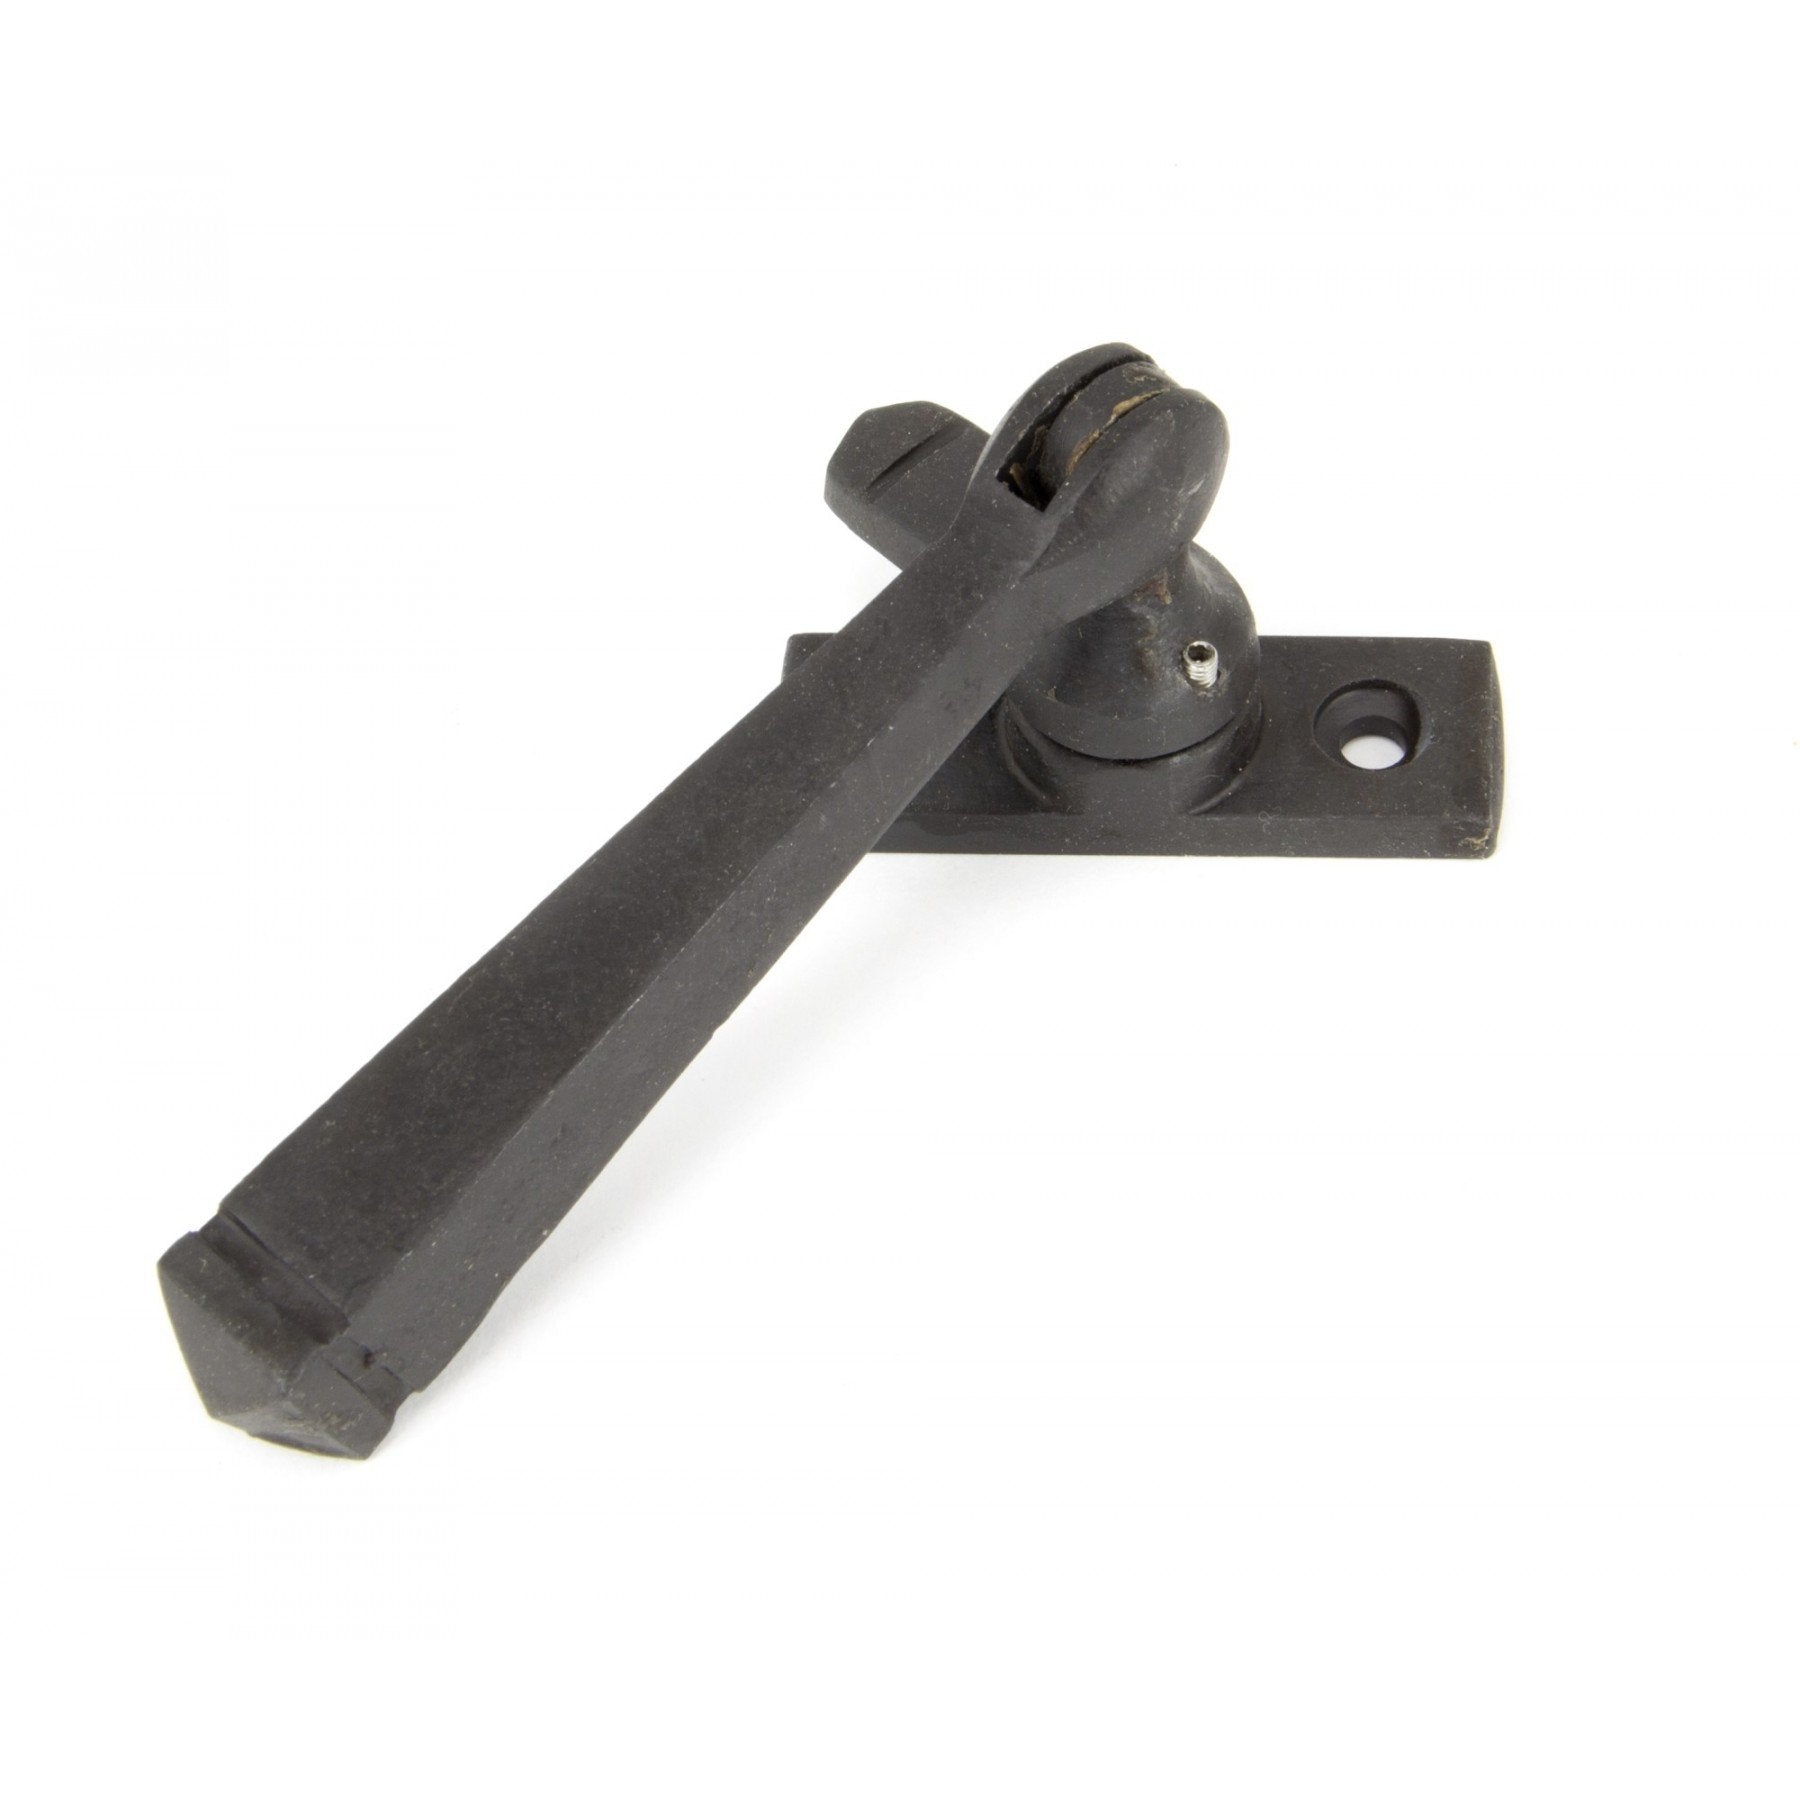 From the Anvil Beeswax Locking Avon Fastener